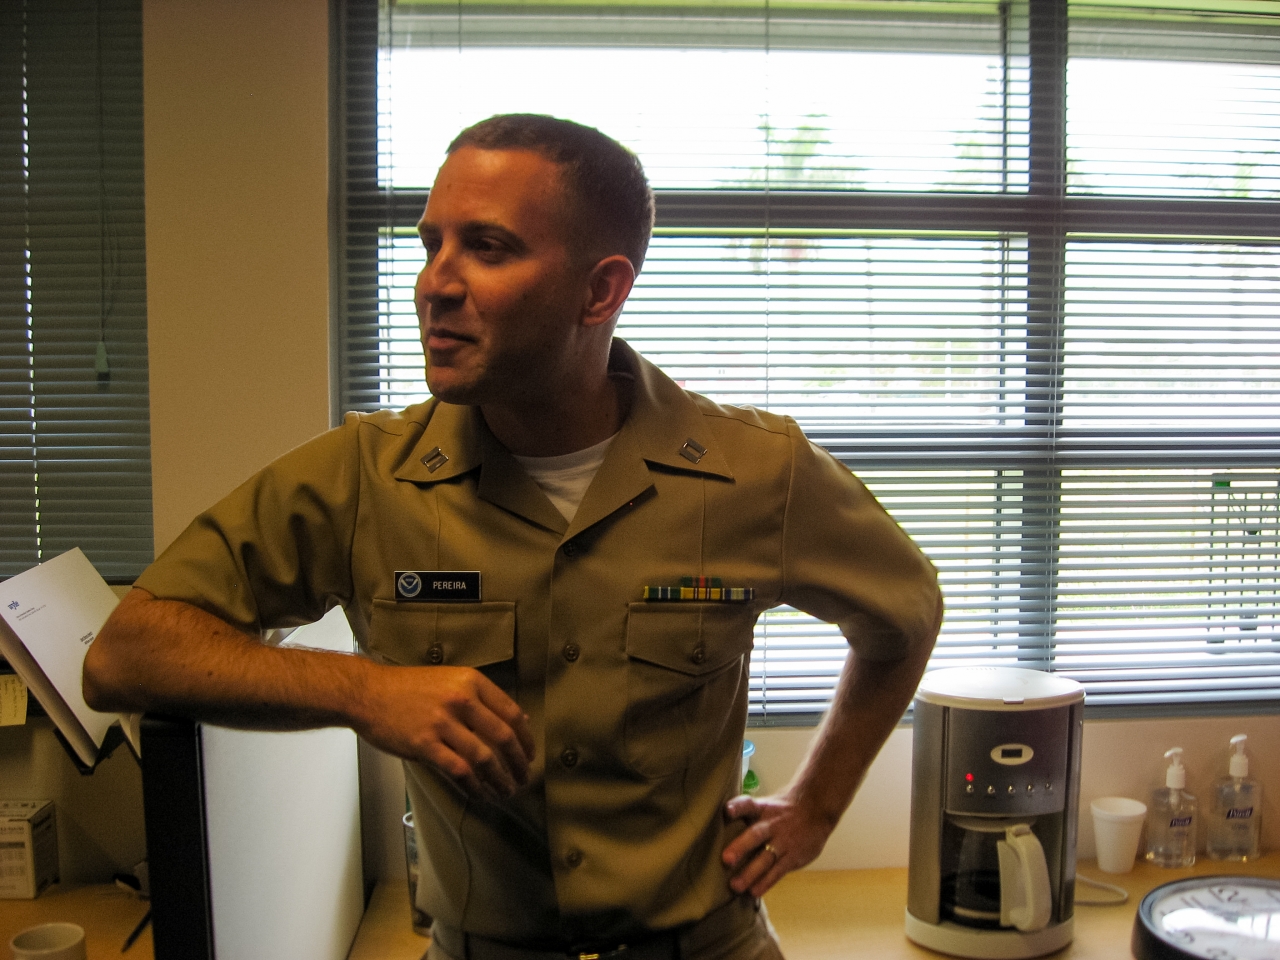 NOAA Corps Lieutenant Jeffrey Pereira discussing his role in the Storm Surge Unit of the National Hurricane Center.